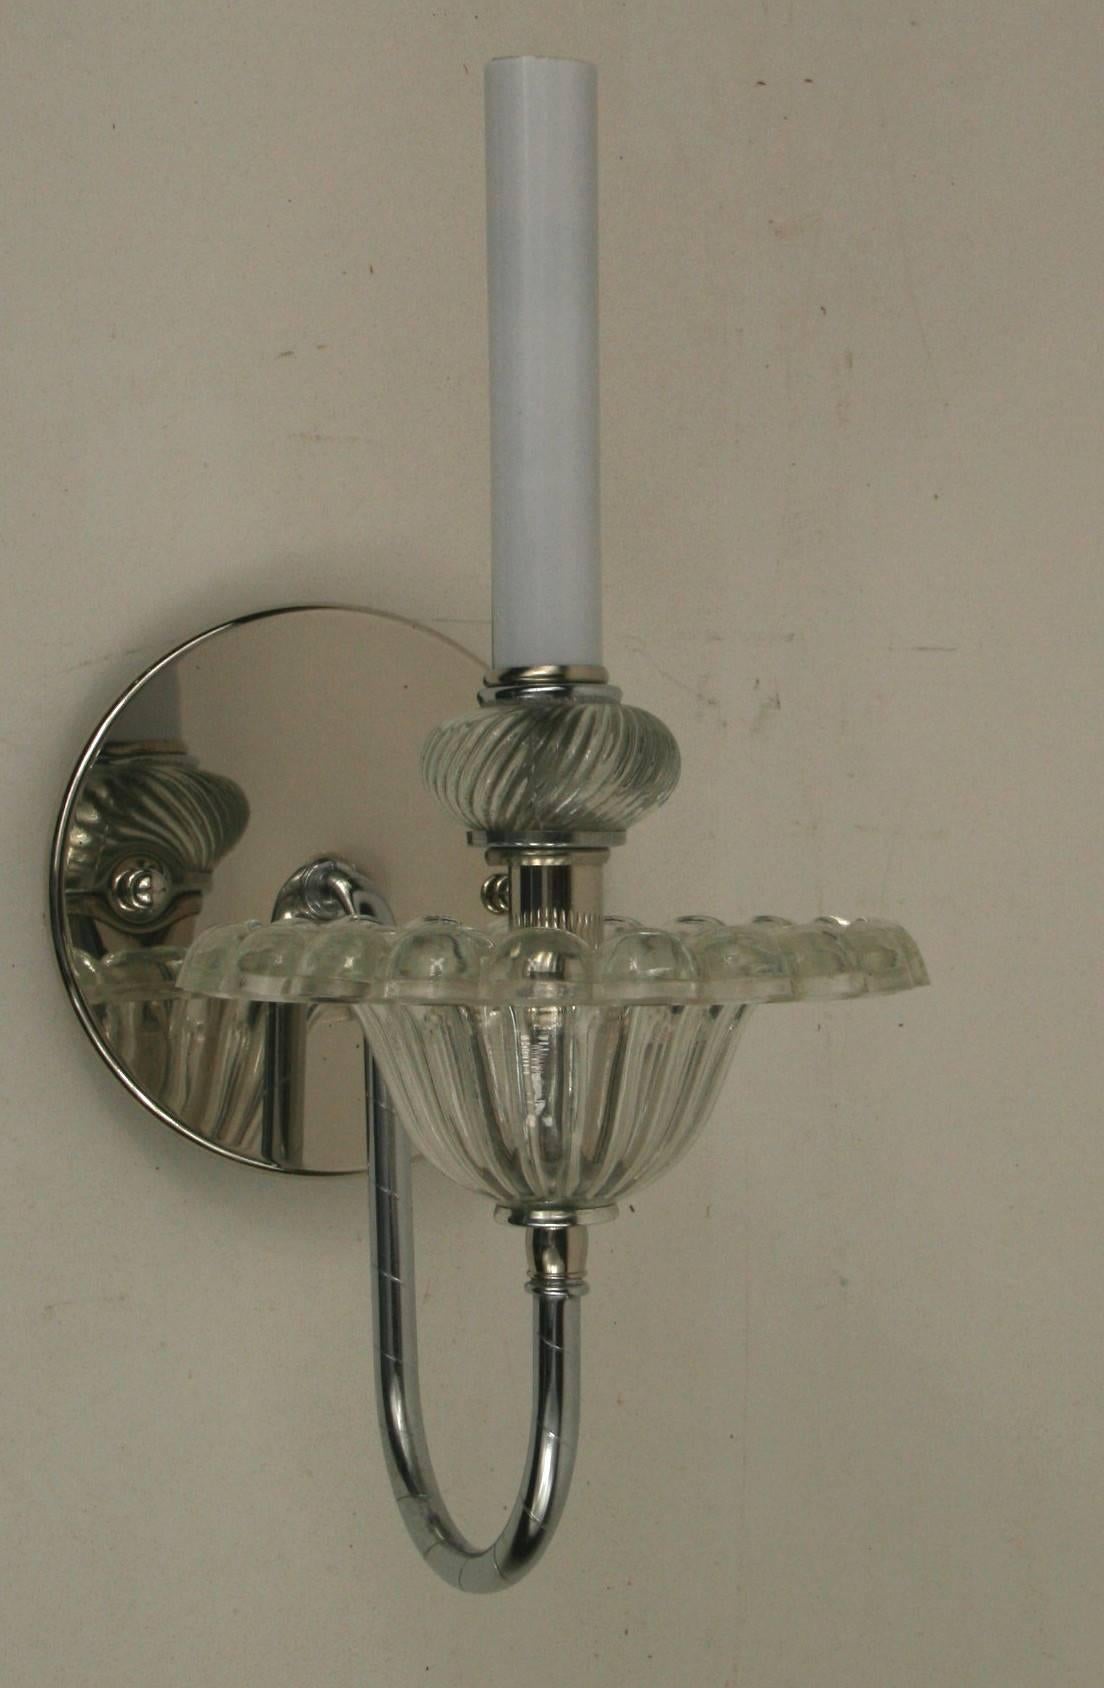 1-4059, pair of Italian tulip glass and nickel sconces.
Takes 60 W candelabra base bulb.